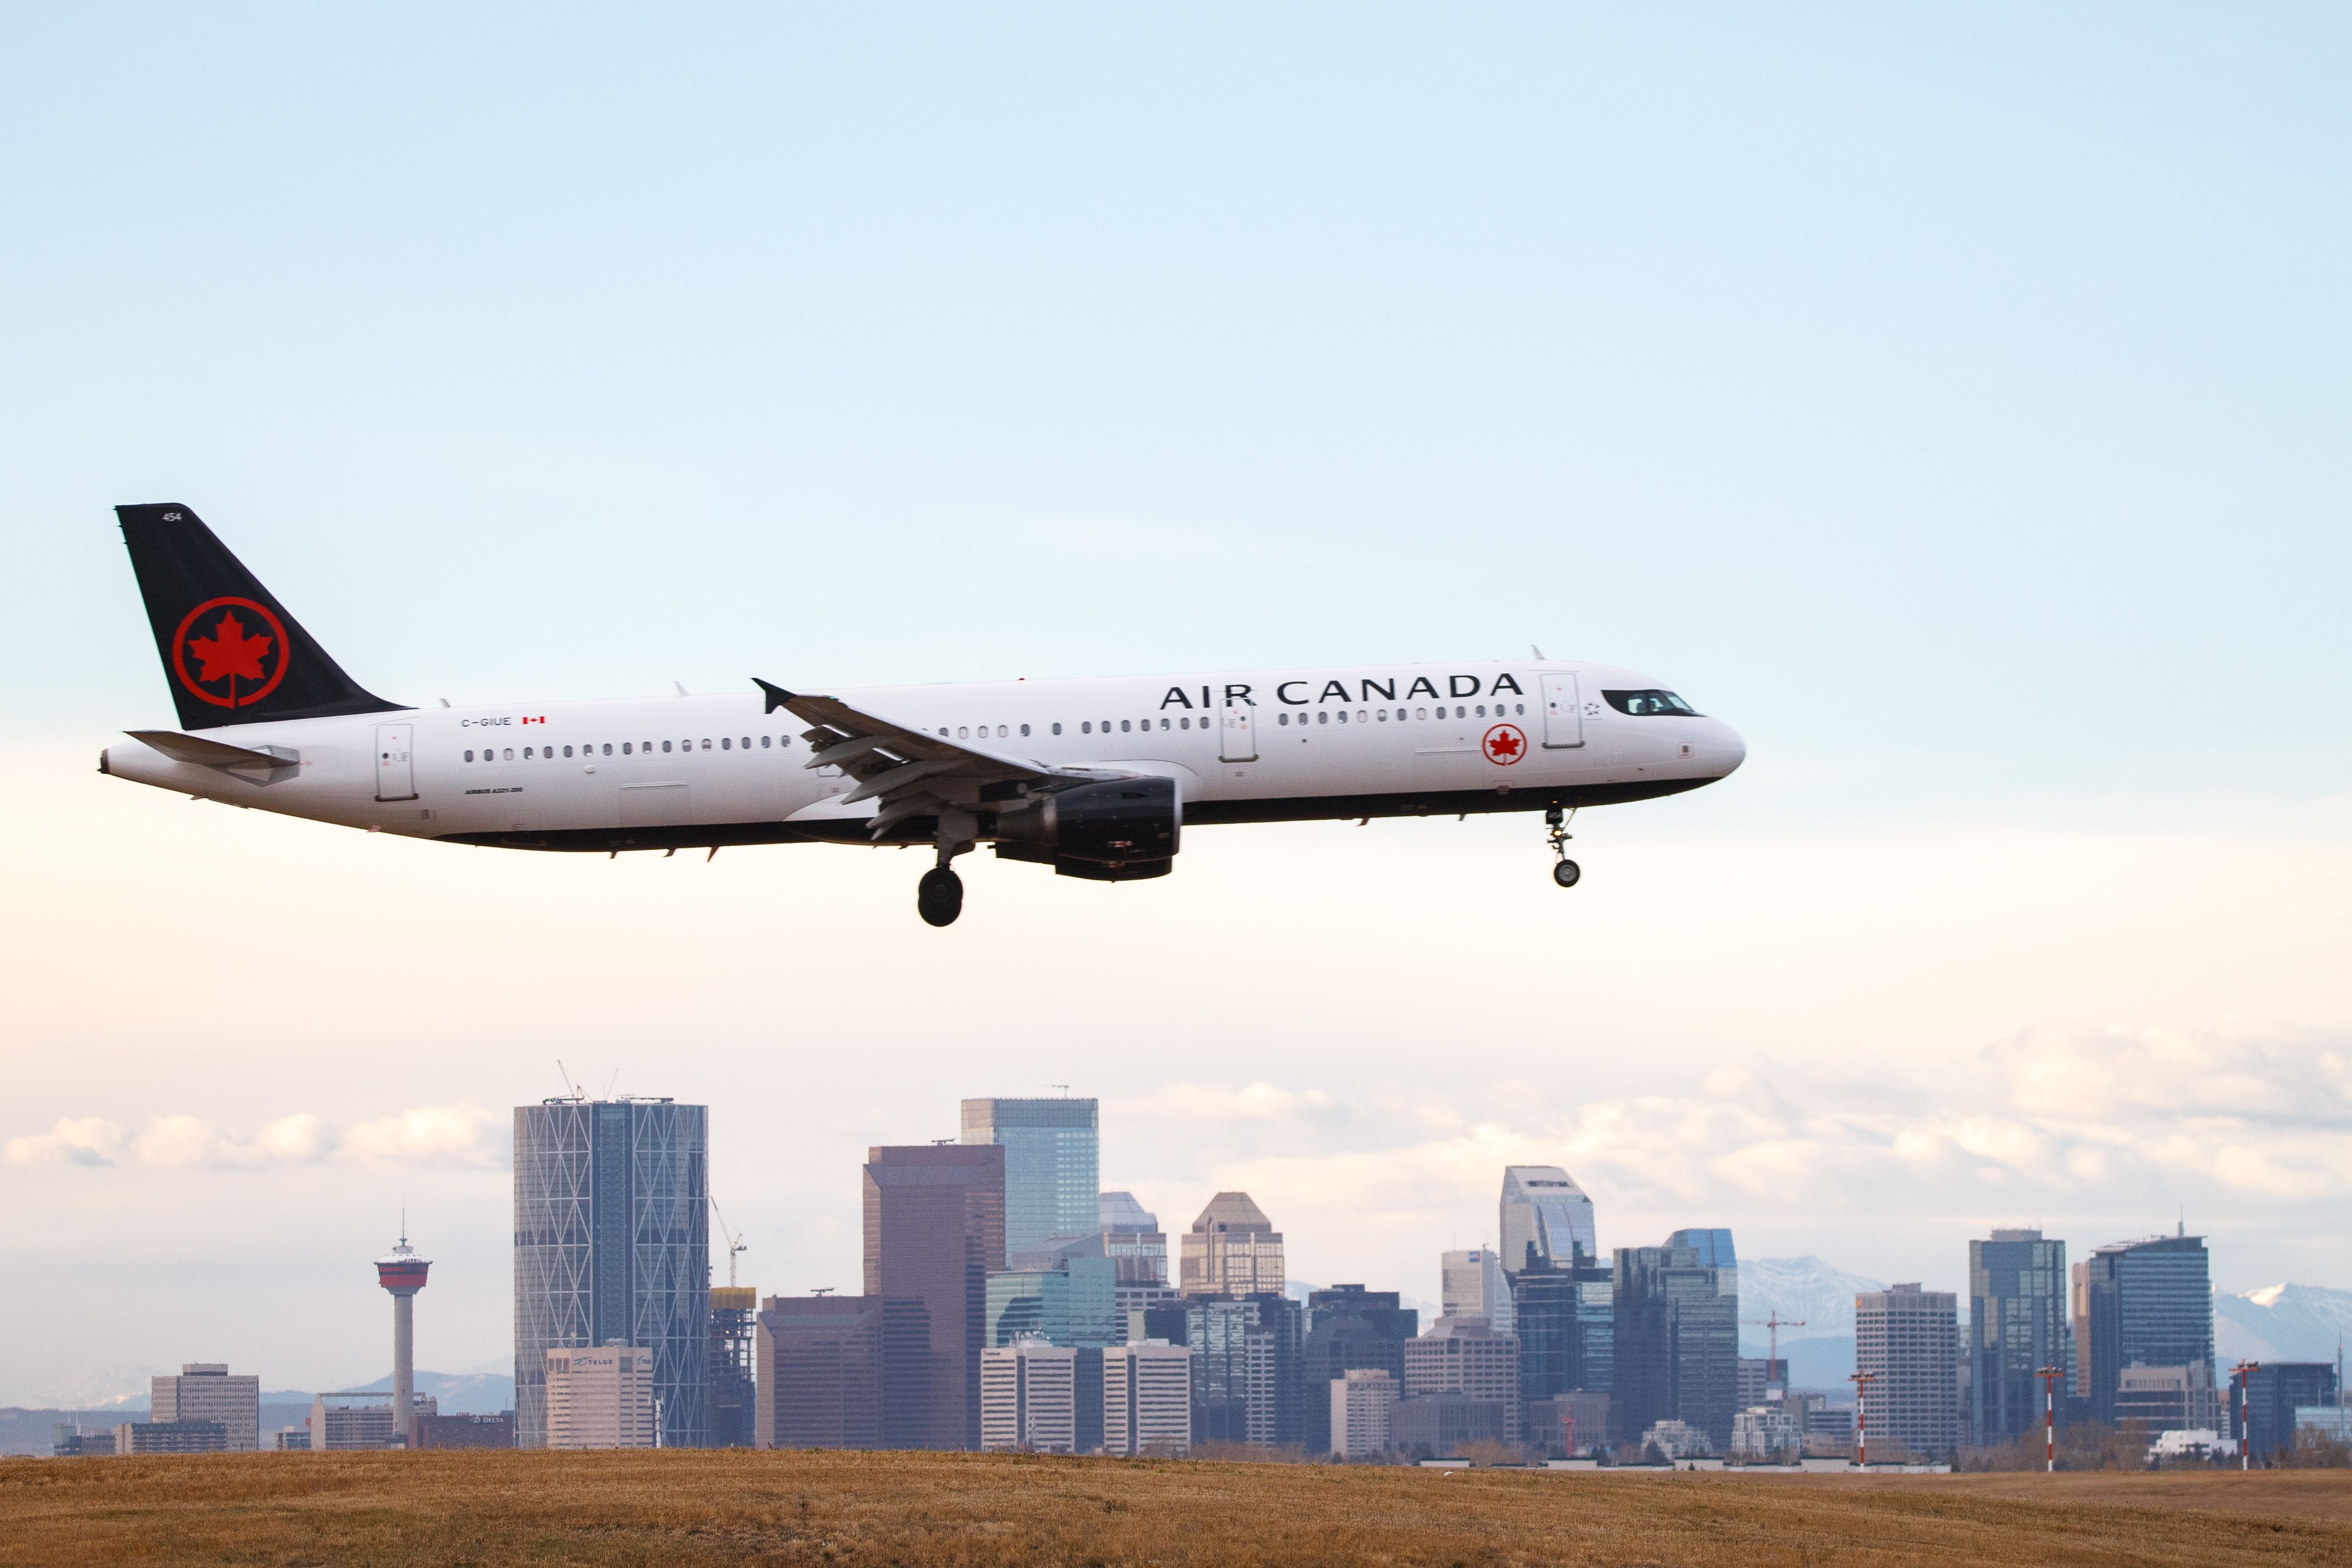 An Air Canada Airbus A321 flying in the sky with a city skyline in the background.